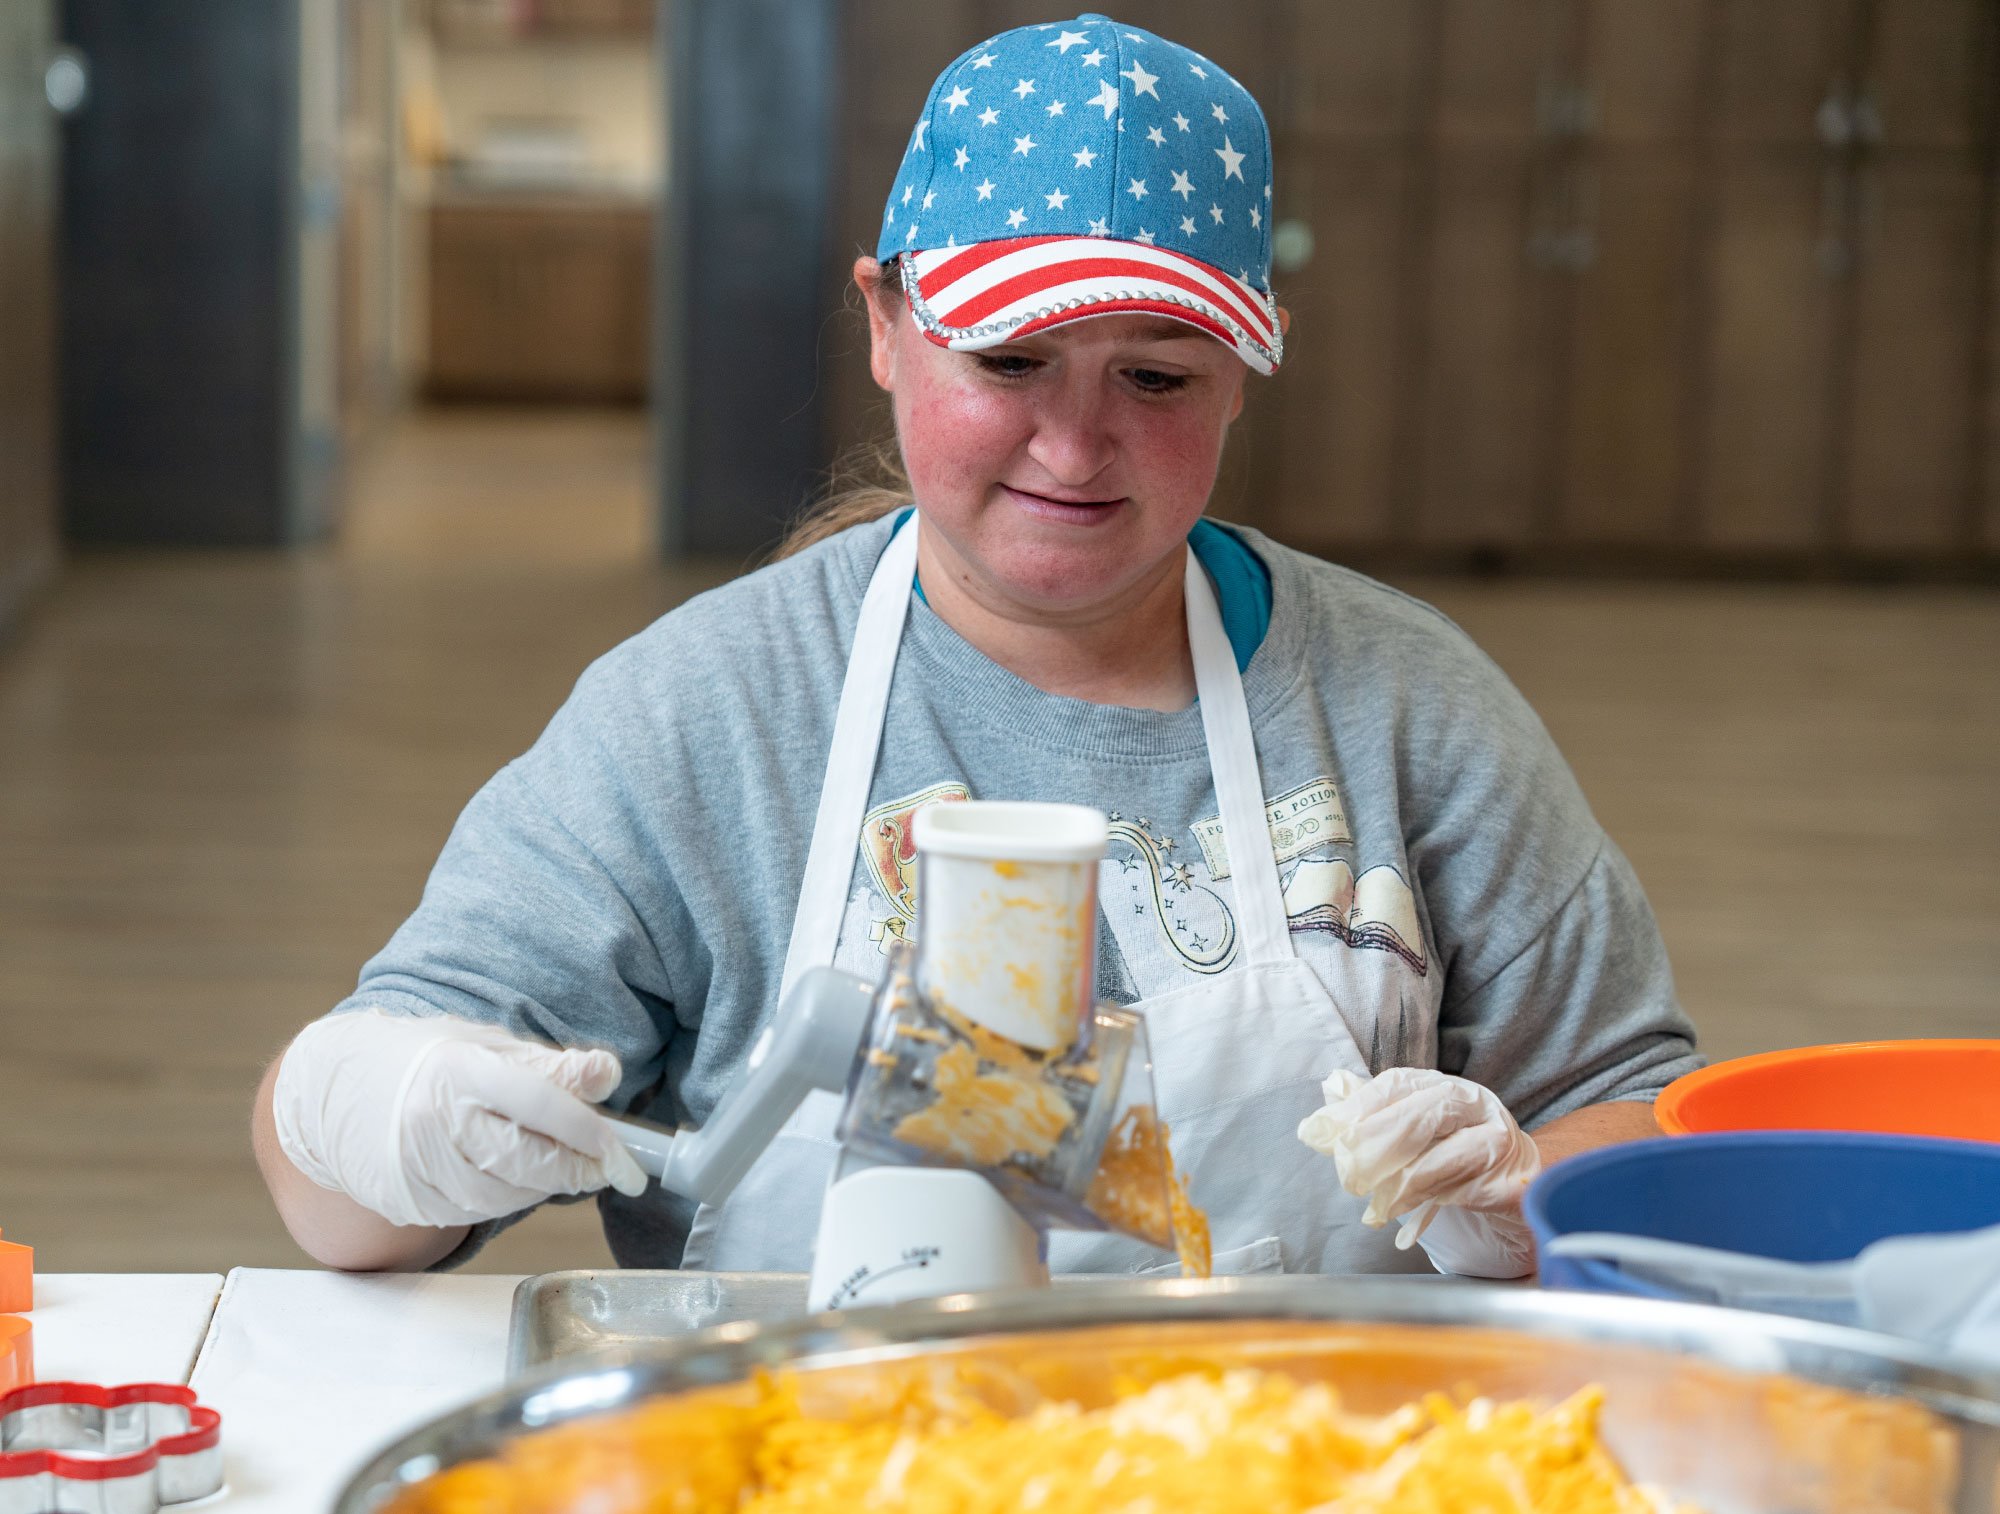 Woman-with-American-hat-and-white-apron-preparing-baked-goods.jpg